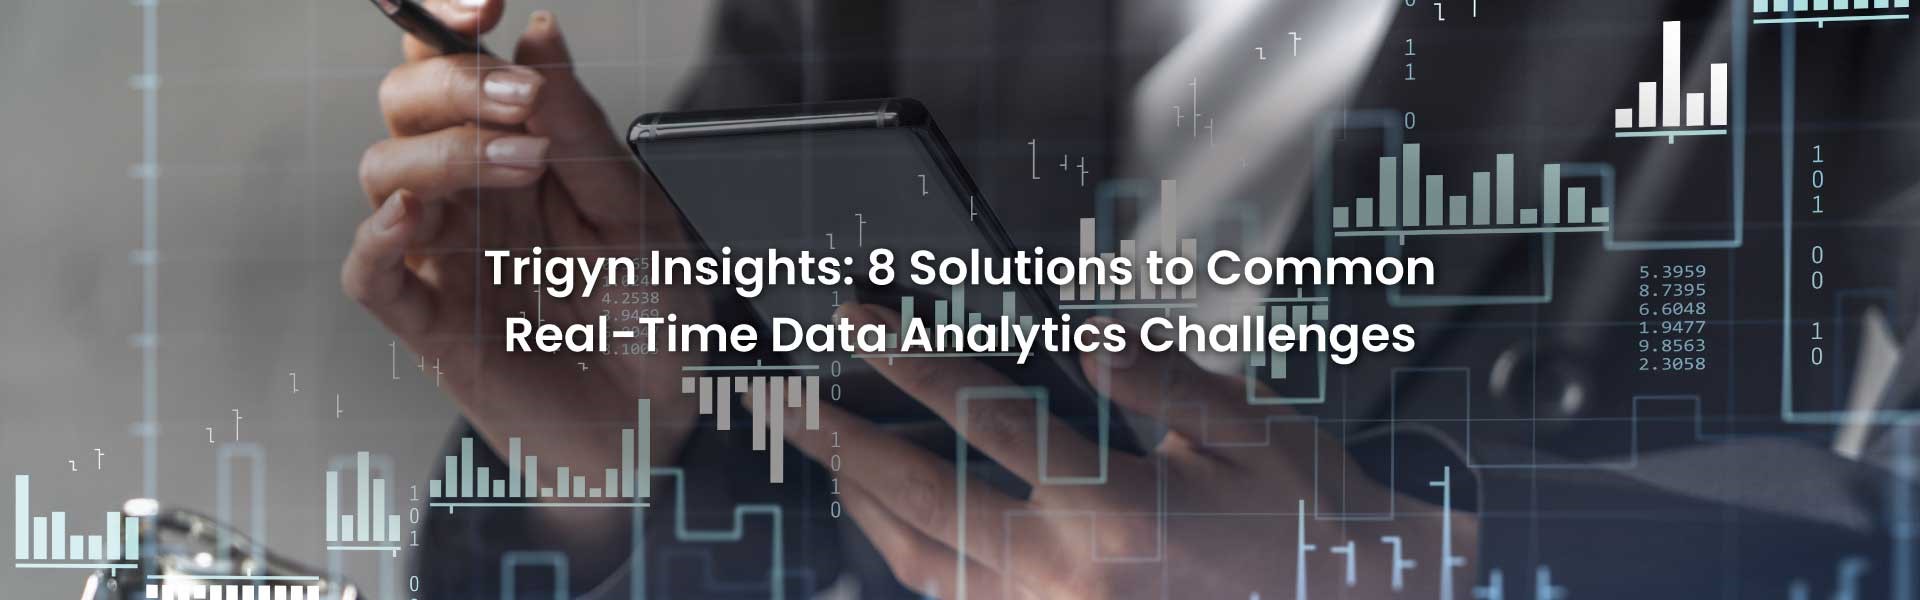 Real-Time Data Analytics Challenges 